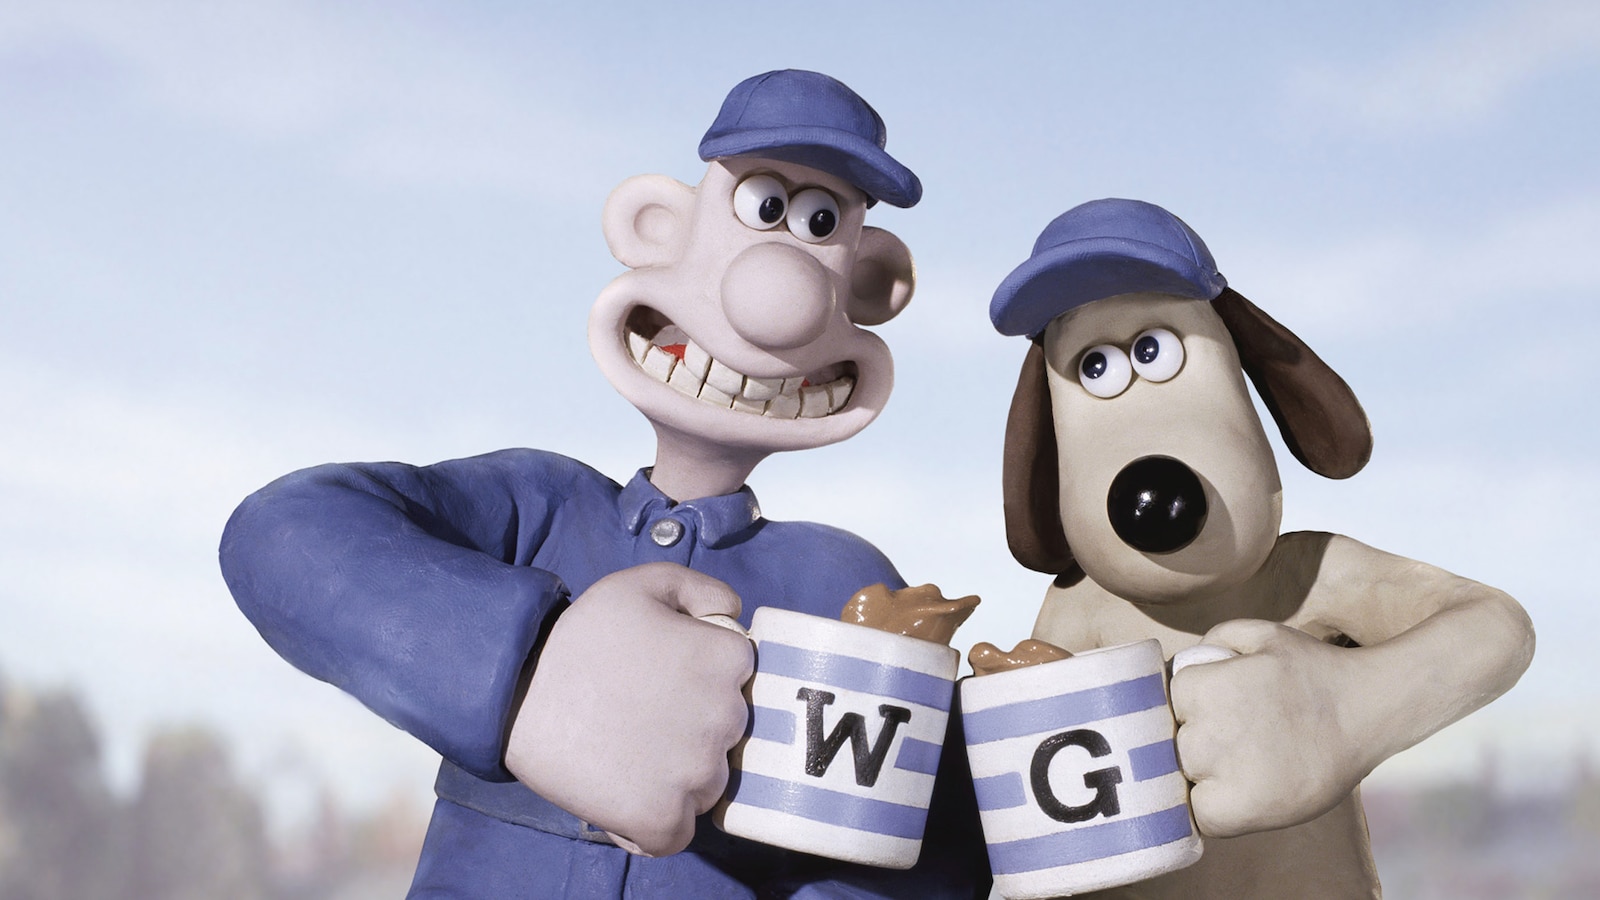 wallace-and-gromit-varulvskaninens-forbannelse-2005